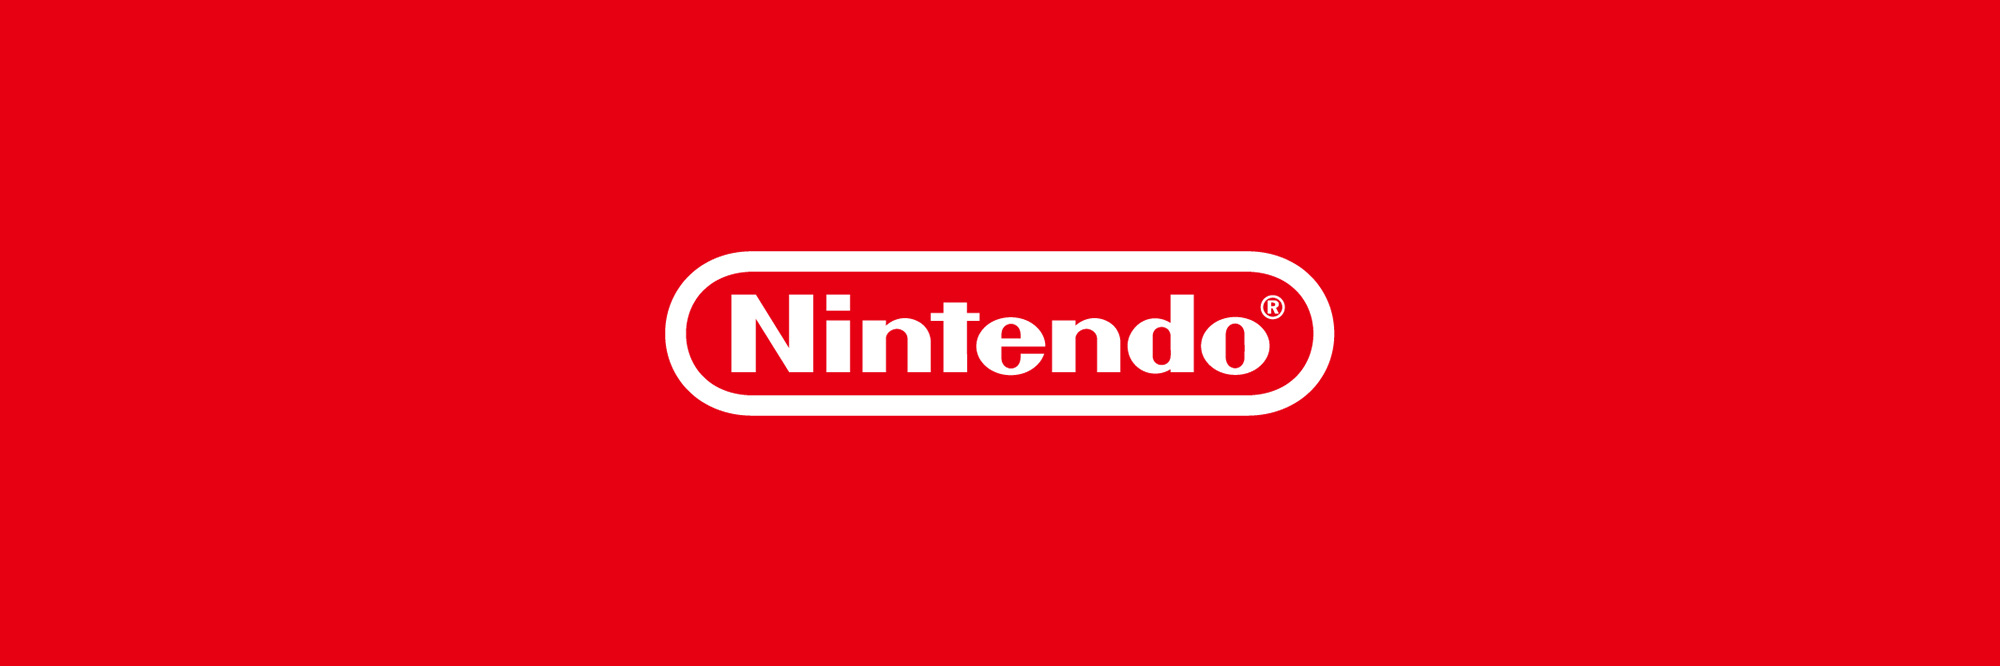 About Nintendo